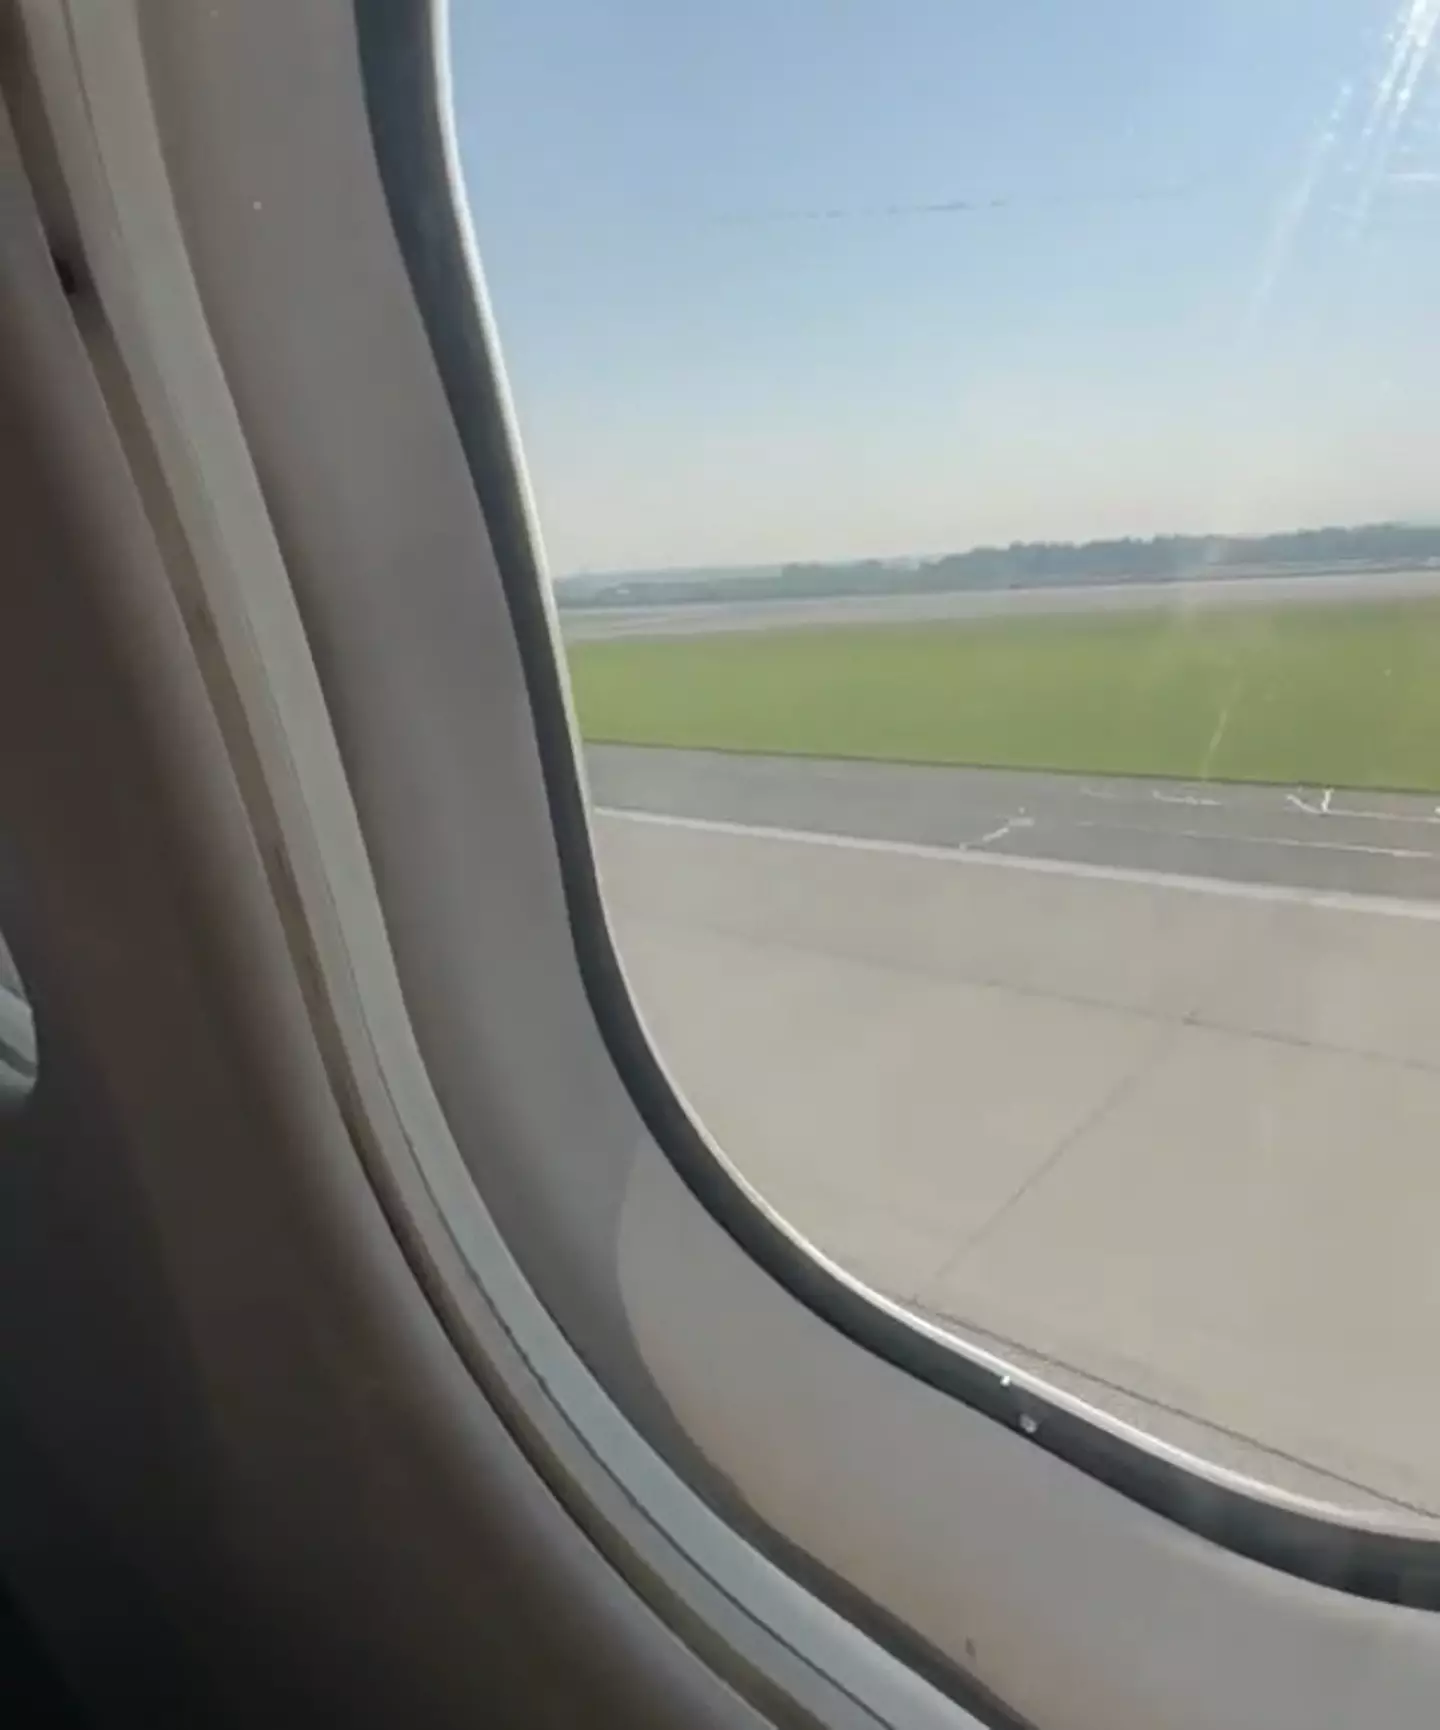 A passenger on board the Delta flight that came down safely with no front landing gear filmed the experience as they touched down on tarmac.